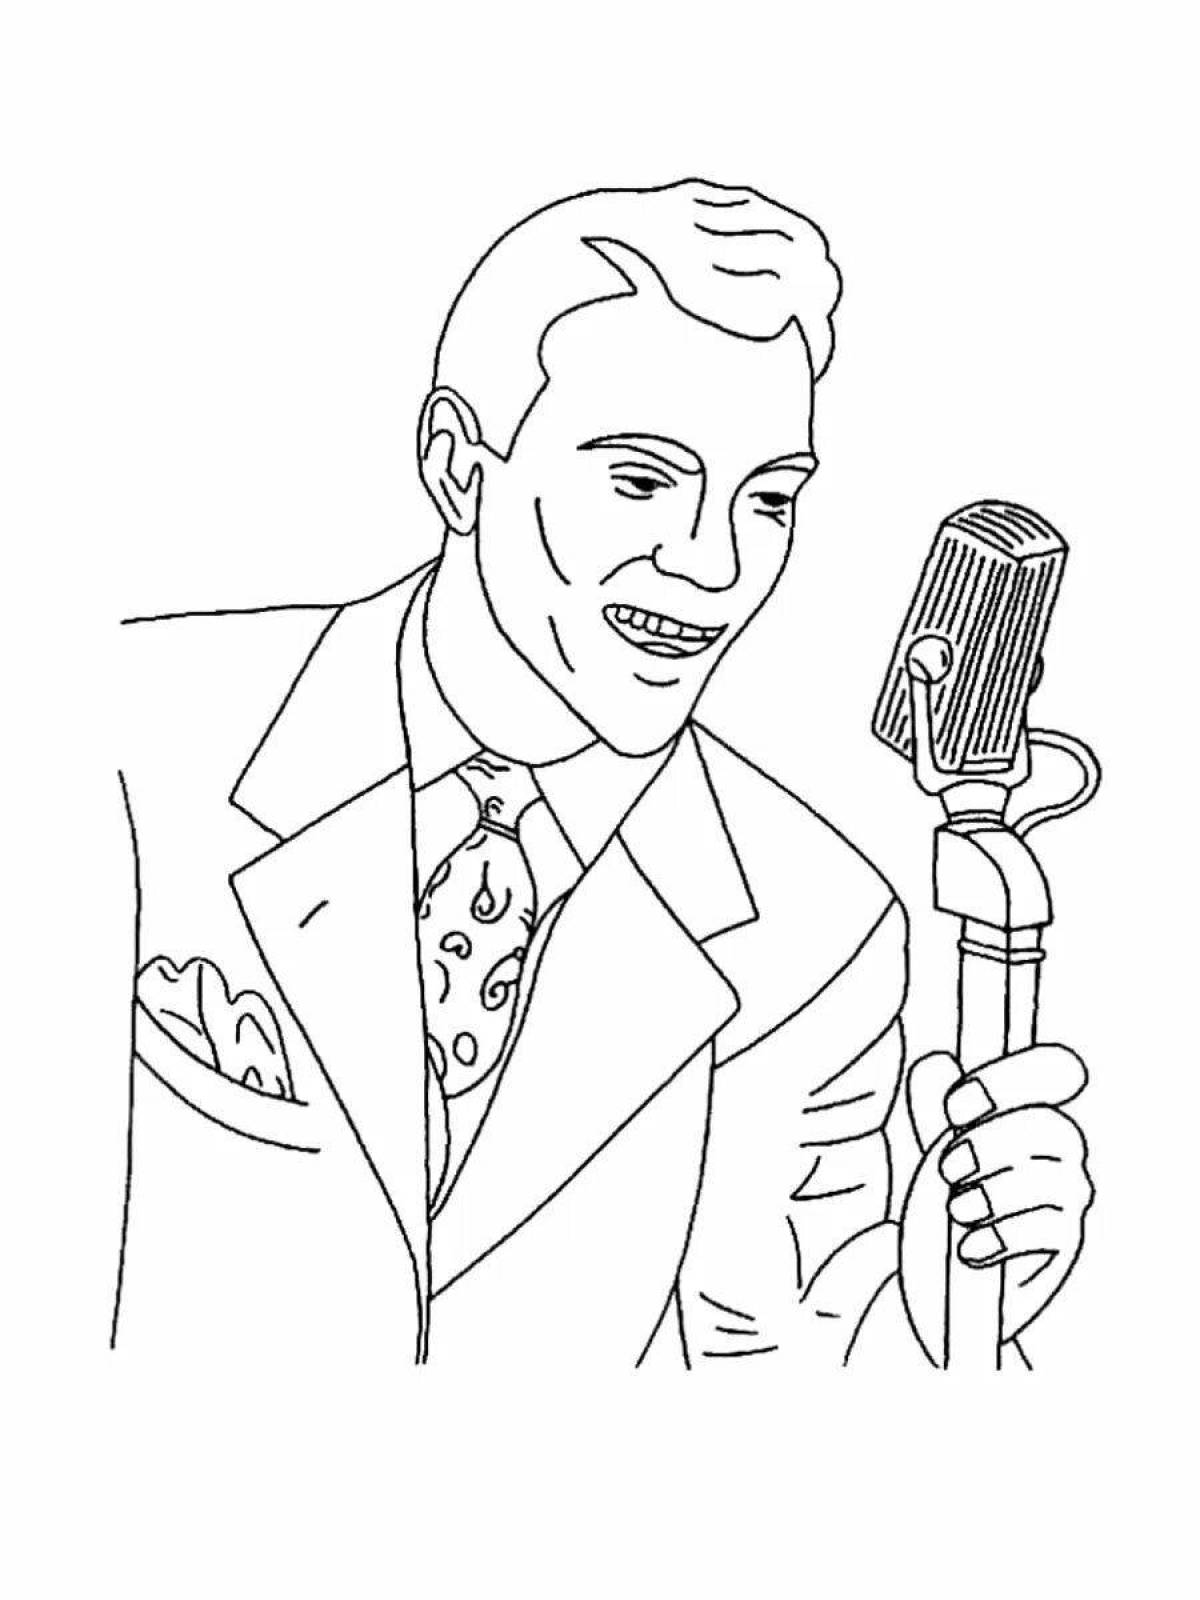 Playful singer coloring page for kids